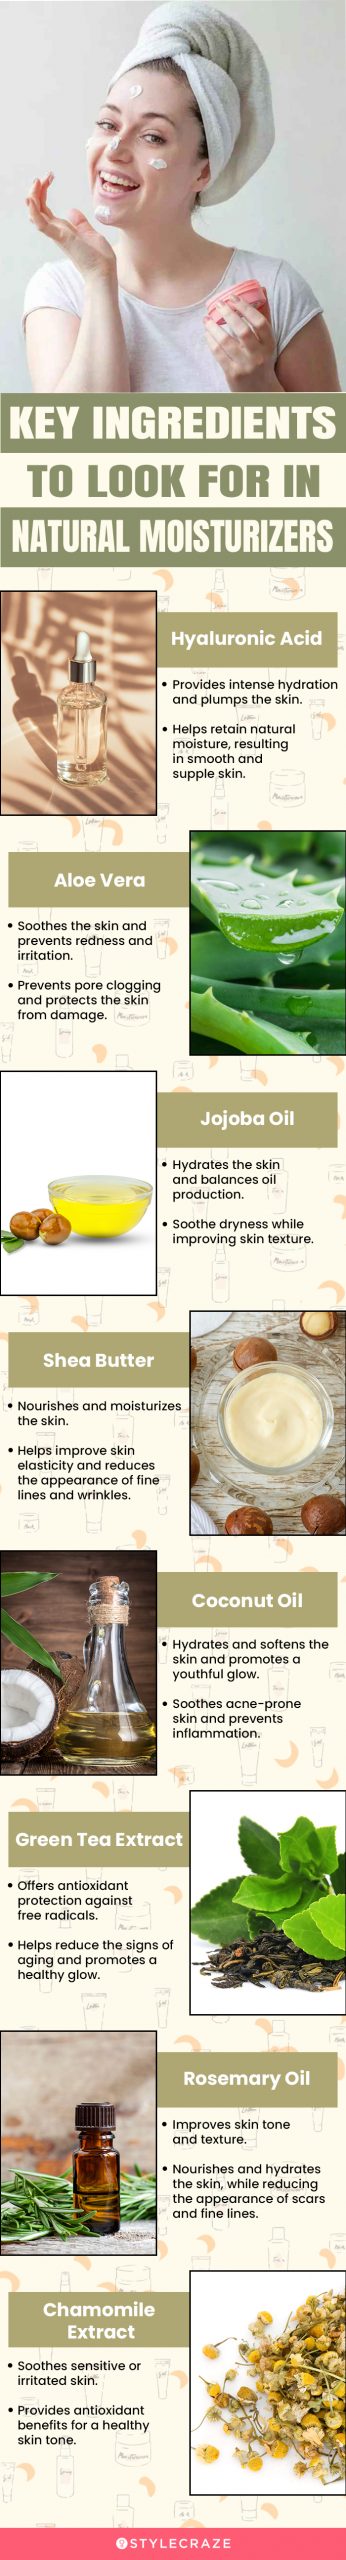 Key Ingredients To Look For In Natural Moisturizers (infographic)